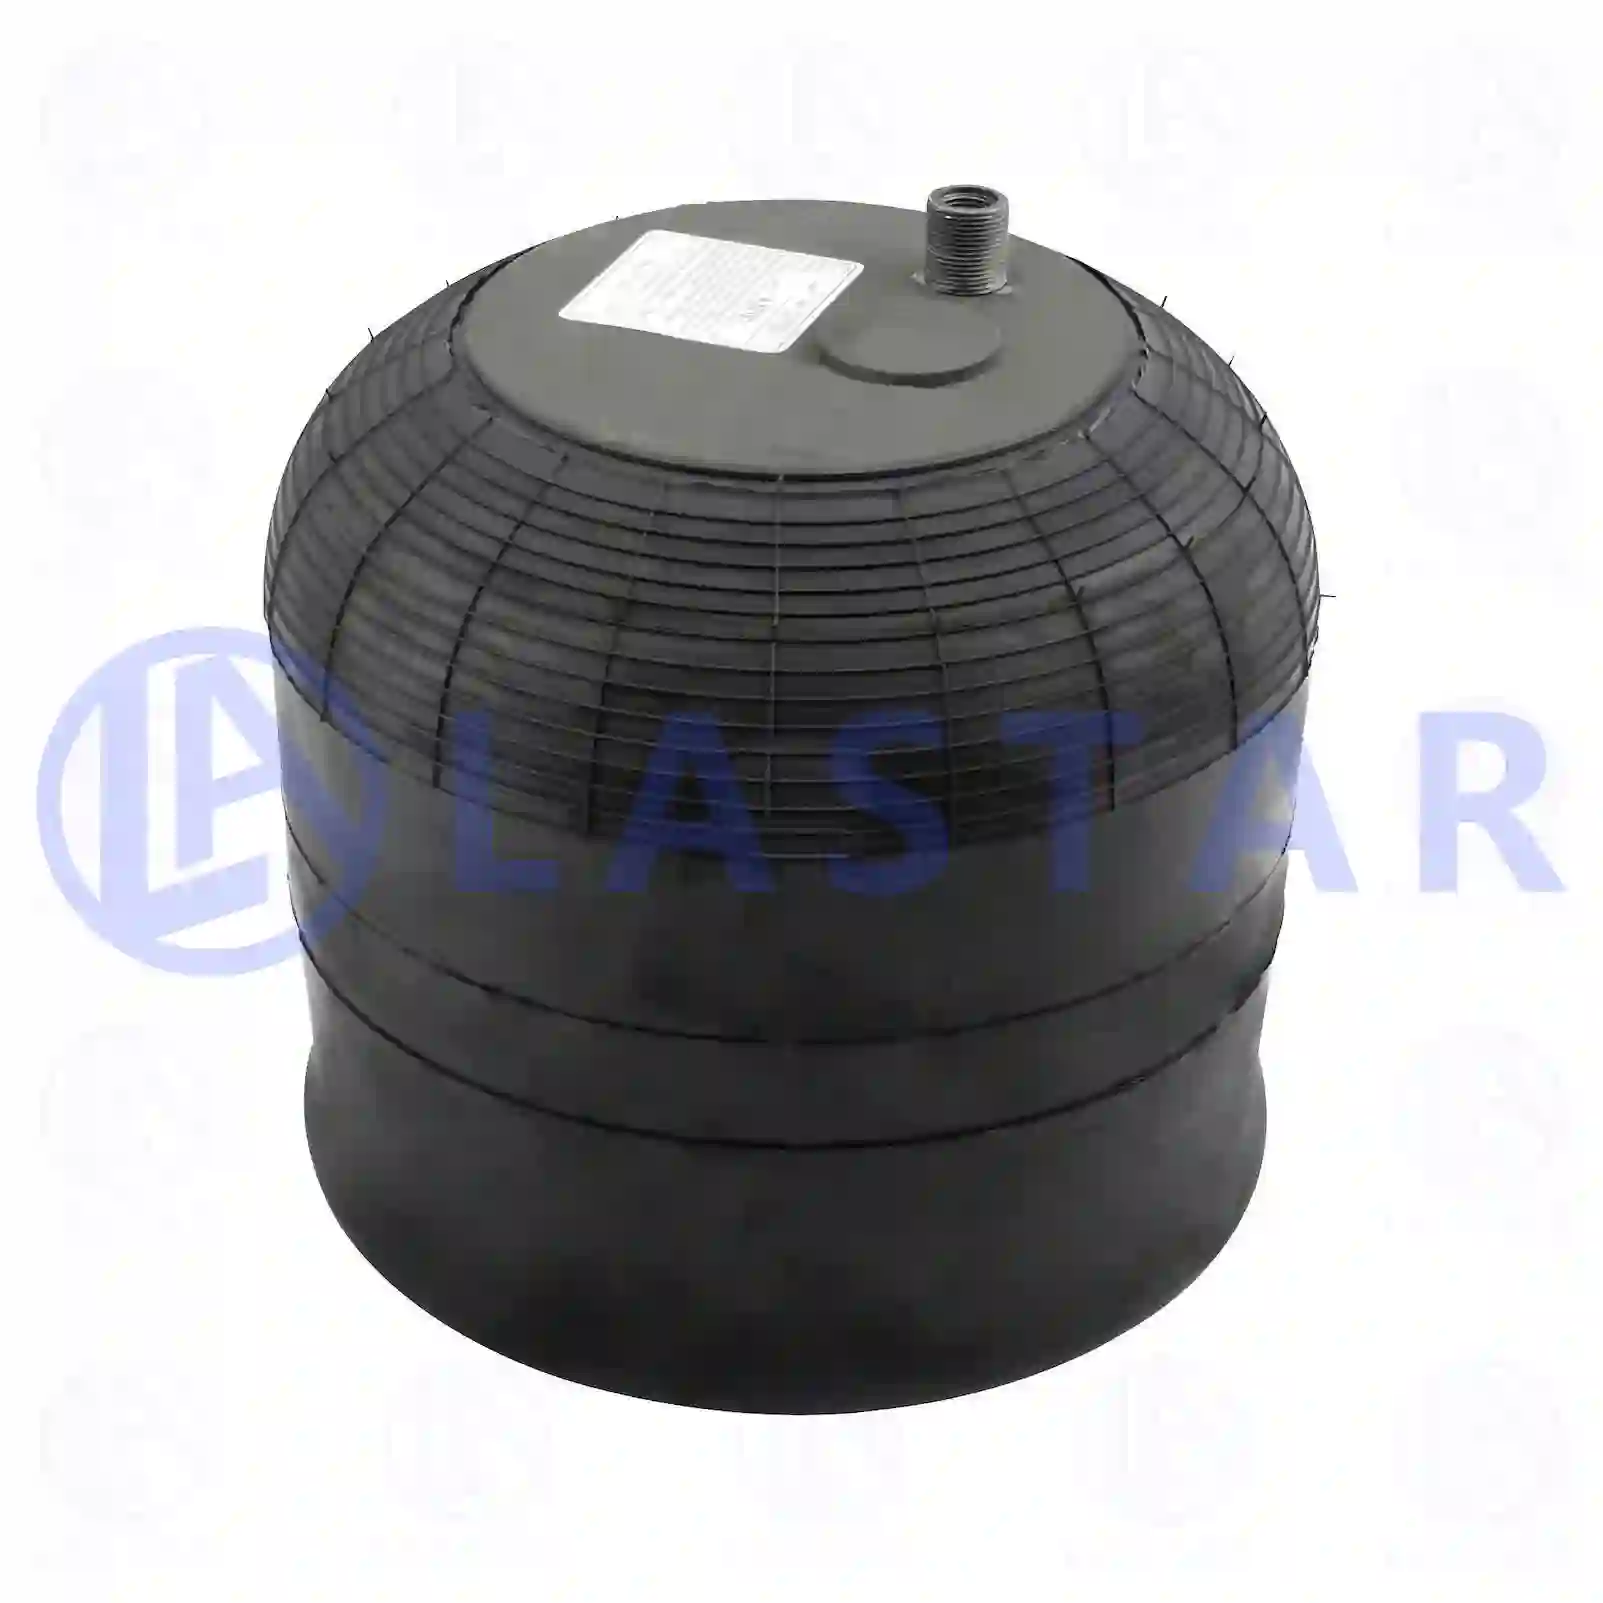 Air spring, with steel piston, 77727146, 9423201821, 9423202621, 9423207221 ||  77727146 Lastar Spare Part | Truck Spare Parts, Auotomotive Spare Parts Air spring, with steel piston, 77727146, 9423201821, 9423202621, 9423207221 ||  77727146 Lastar Spare Part | Truck Spare Parts, Auotomotive Spare Parts